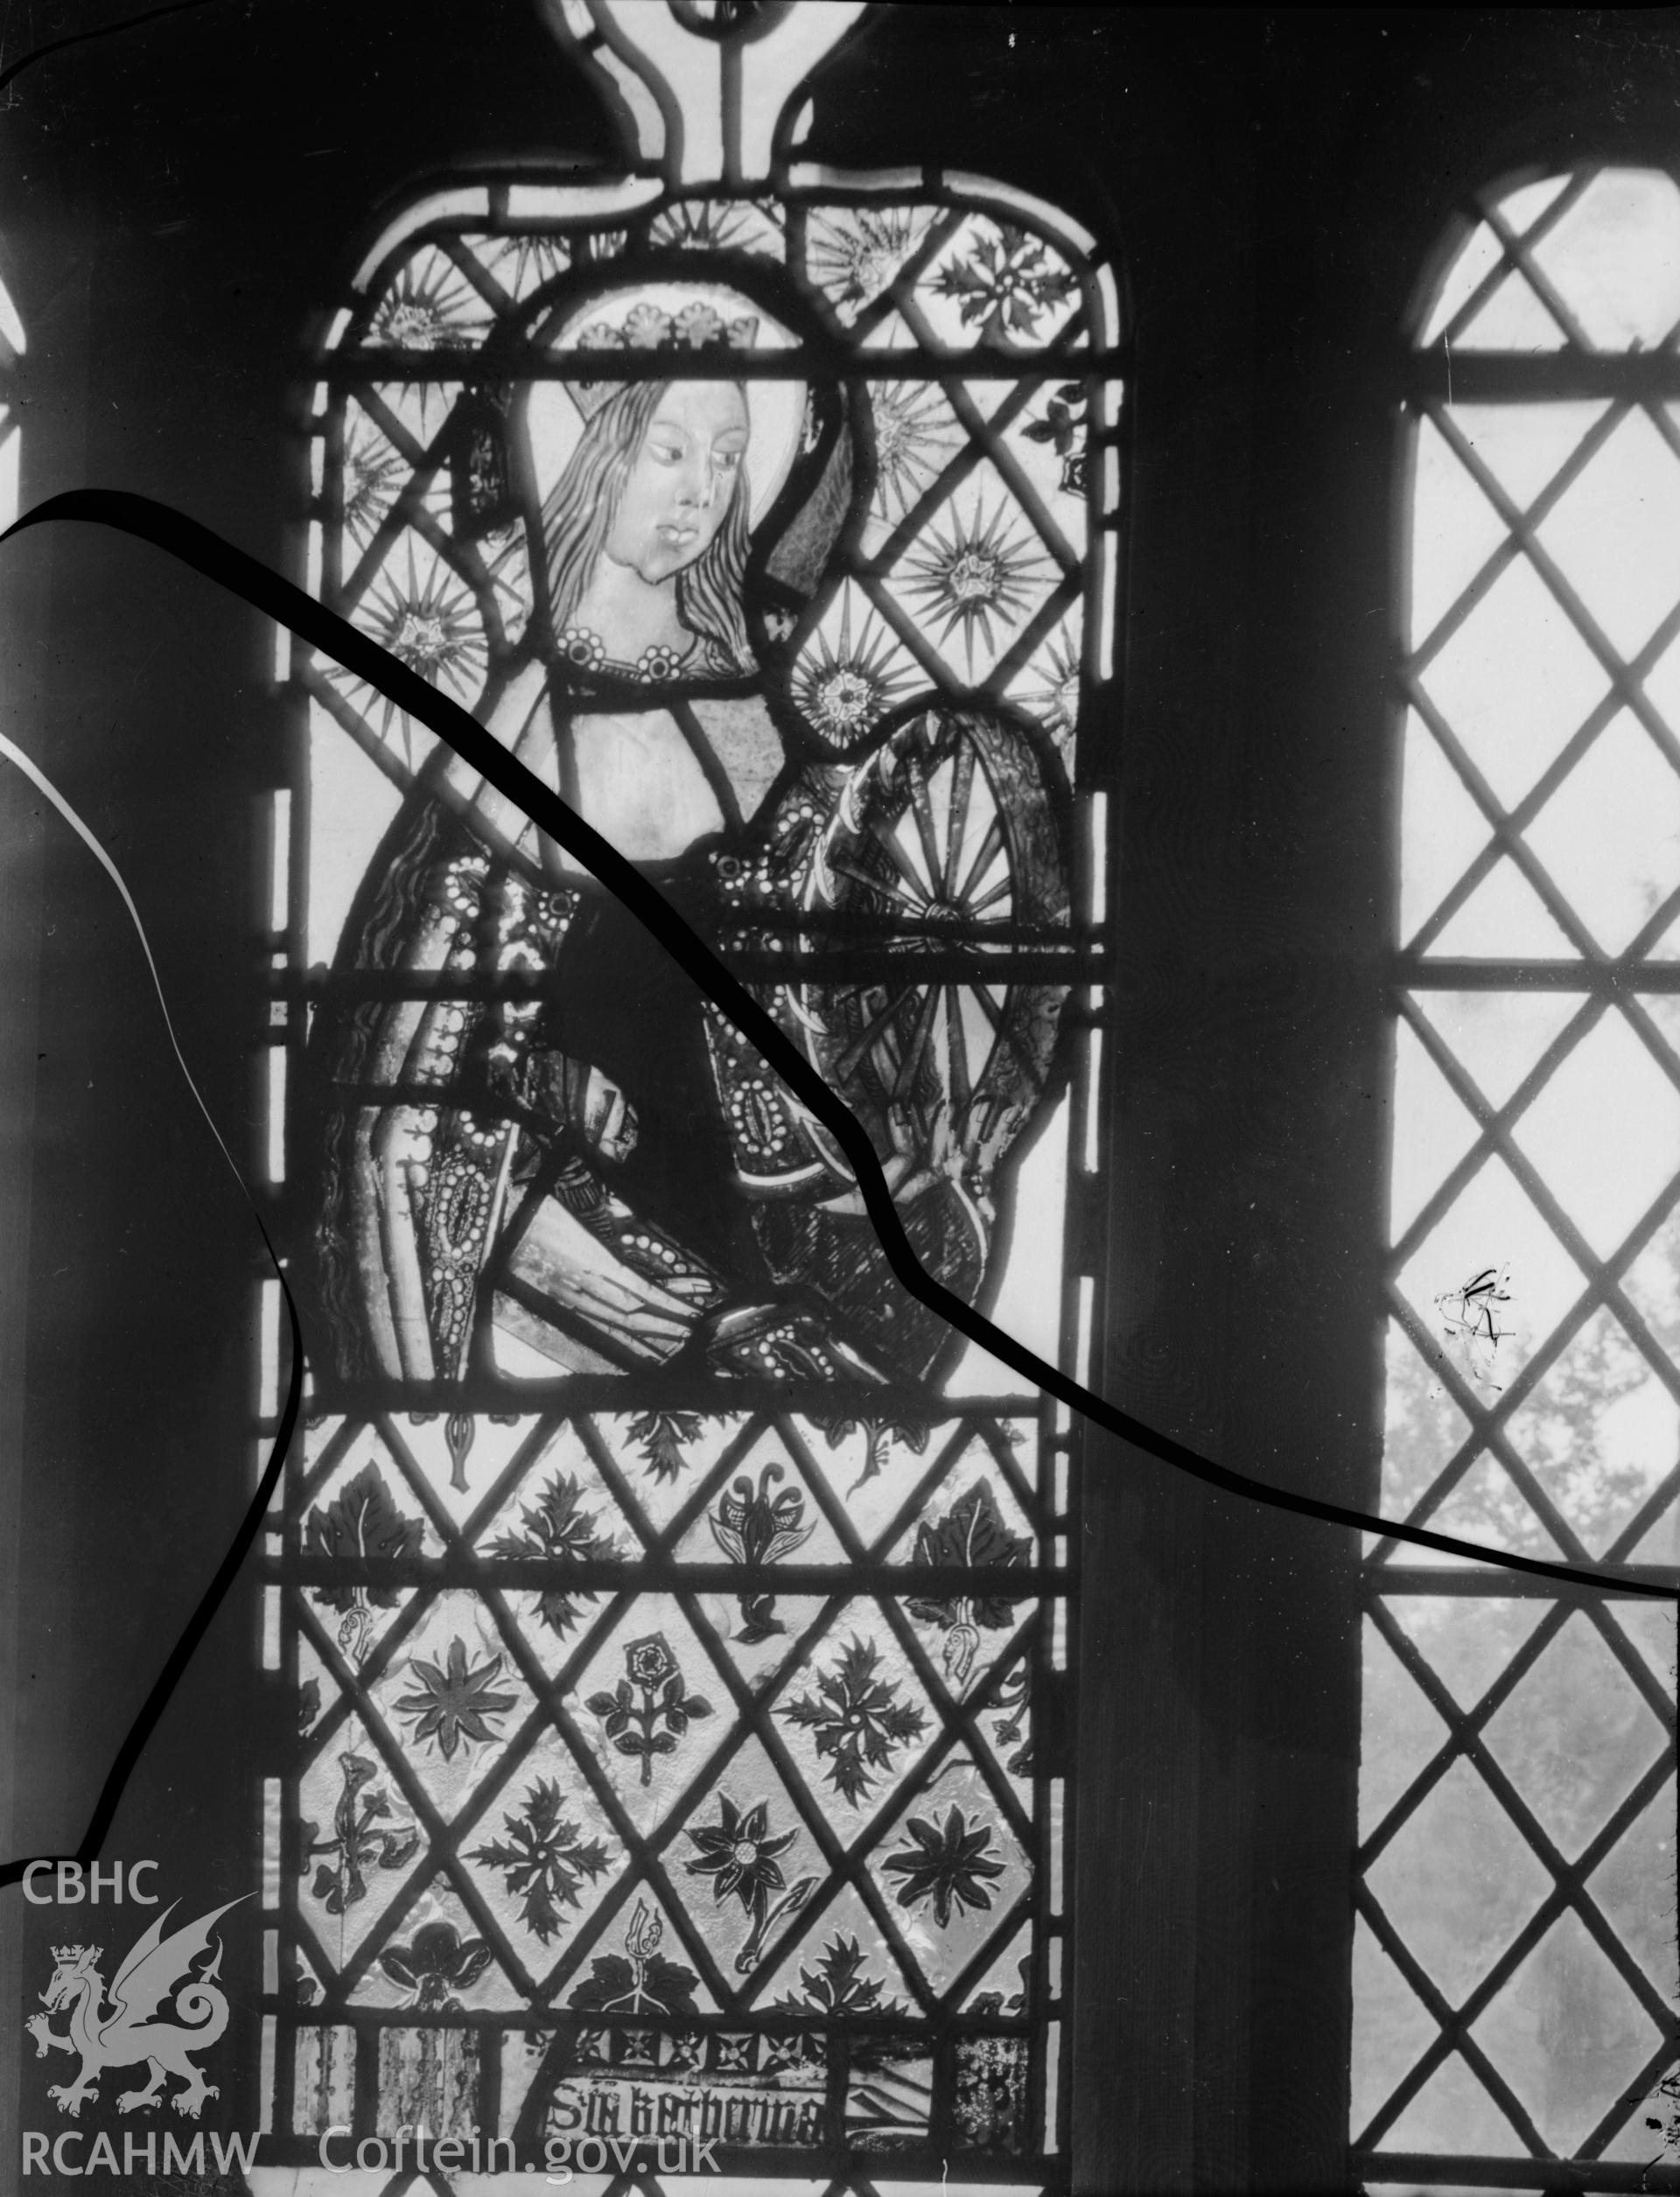 Black and white photo showing stained glass window at Old Radnor Church.